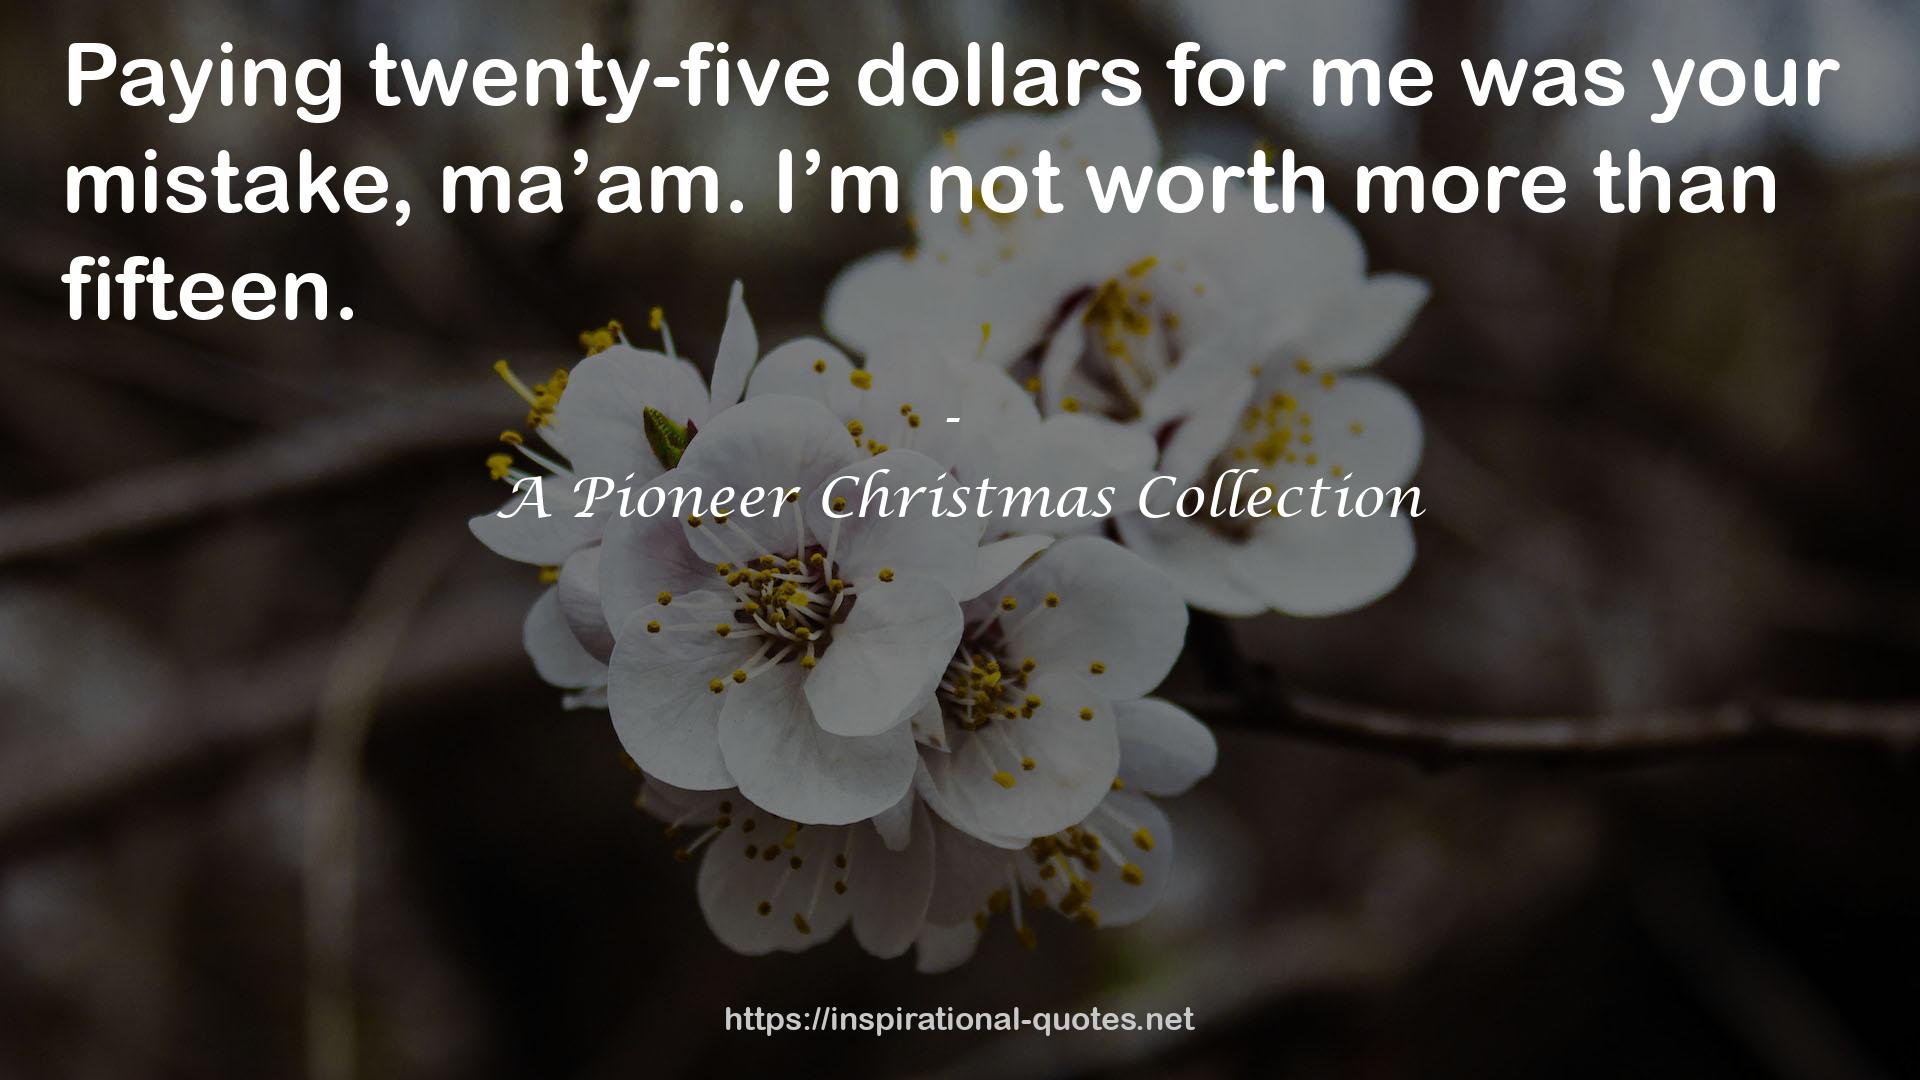 A Pioneer Christmas Collection QUOTES